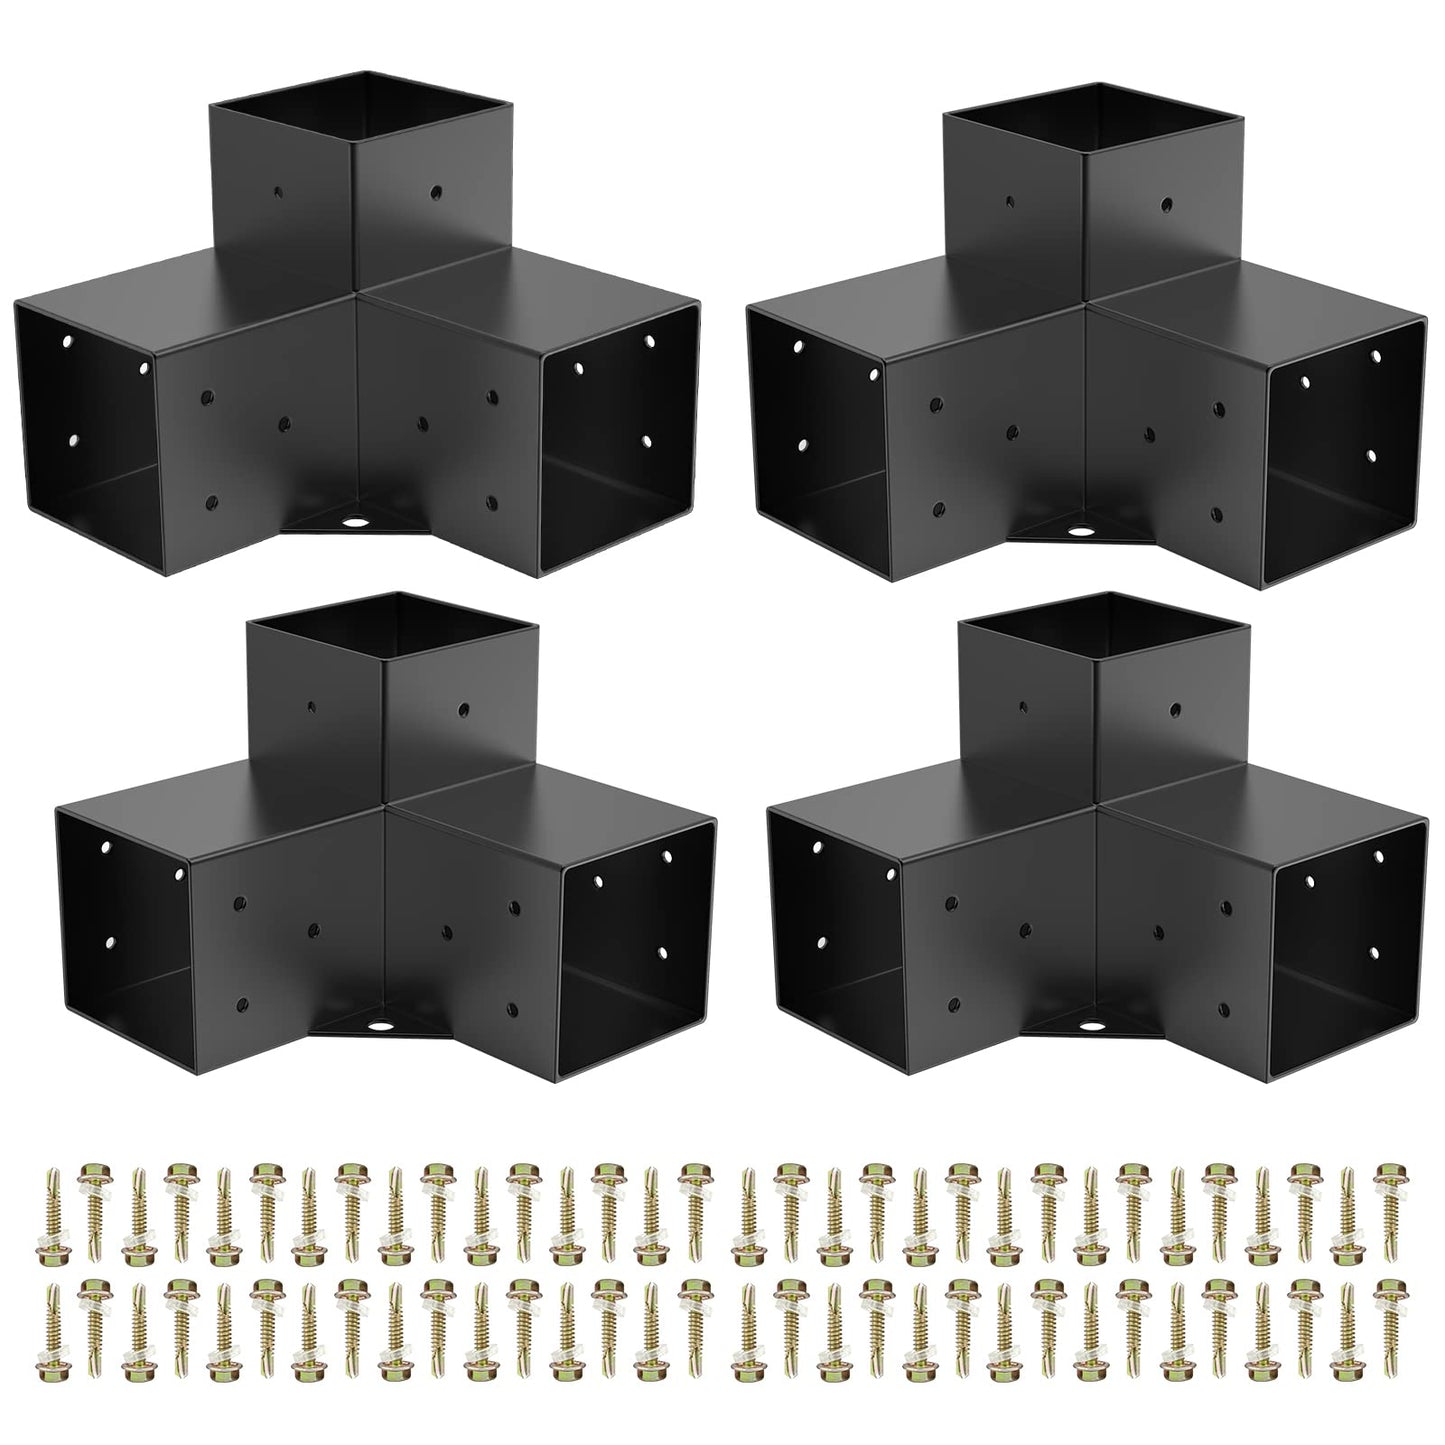 Woodworks Pergola pergola Brackets 3-Way Right Angle Corner Bracket DIY Elevated Wood Stand 4PACK with Screws for 4x4 (Actual: 3.5x3.5 Inch) Lumber